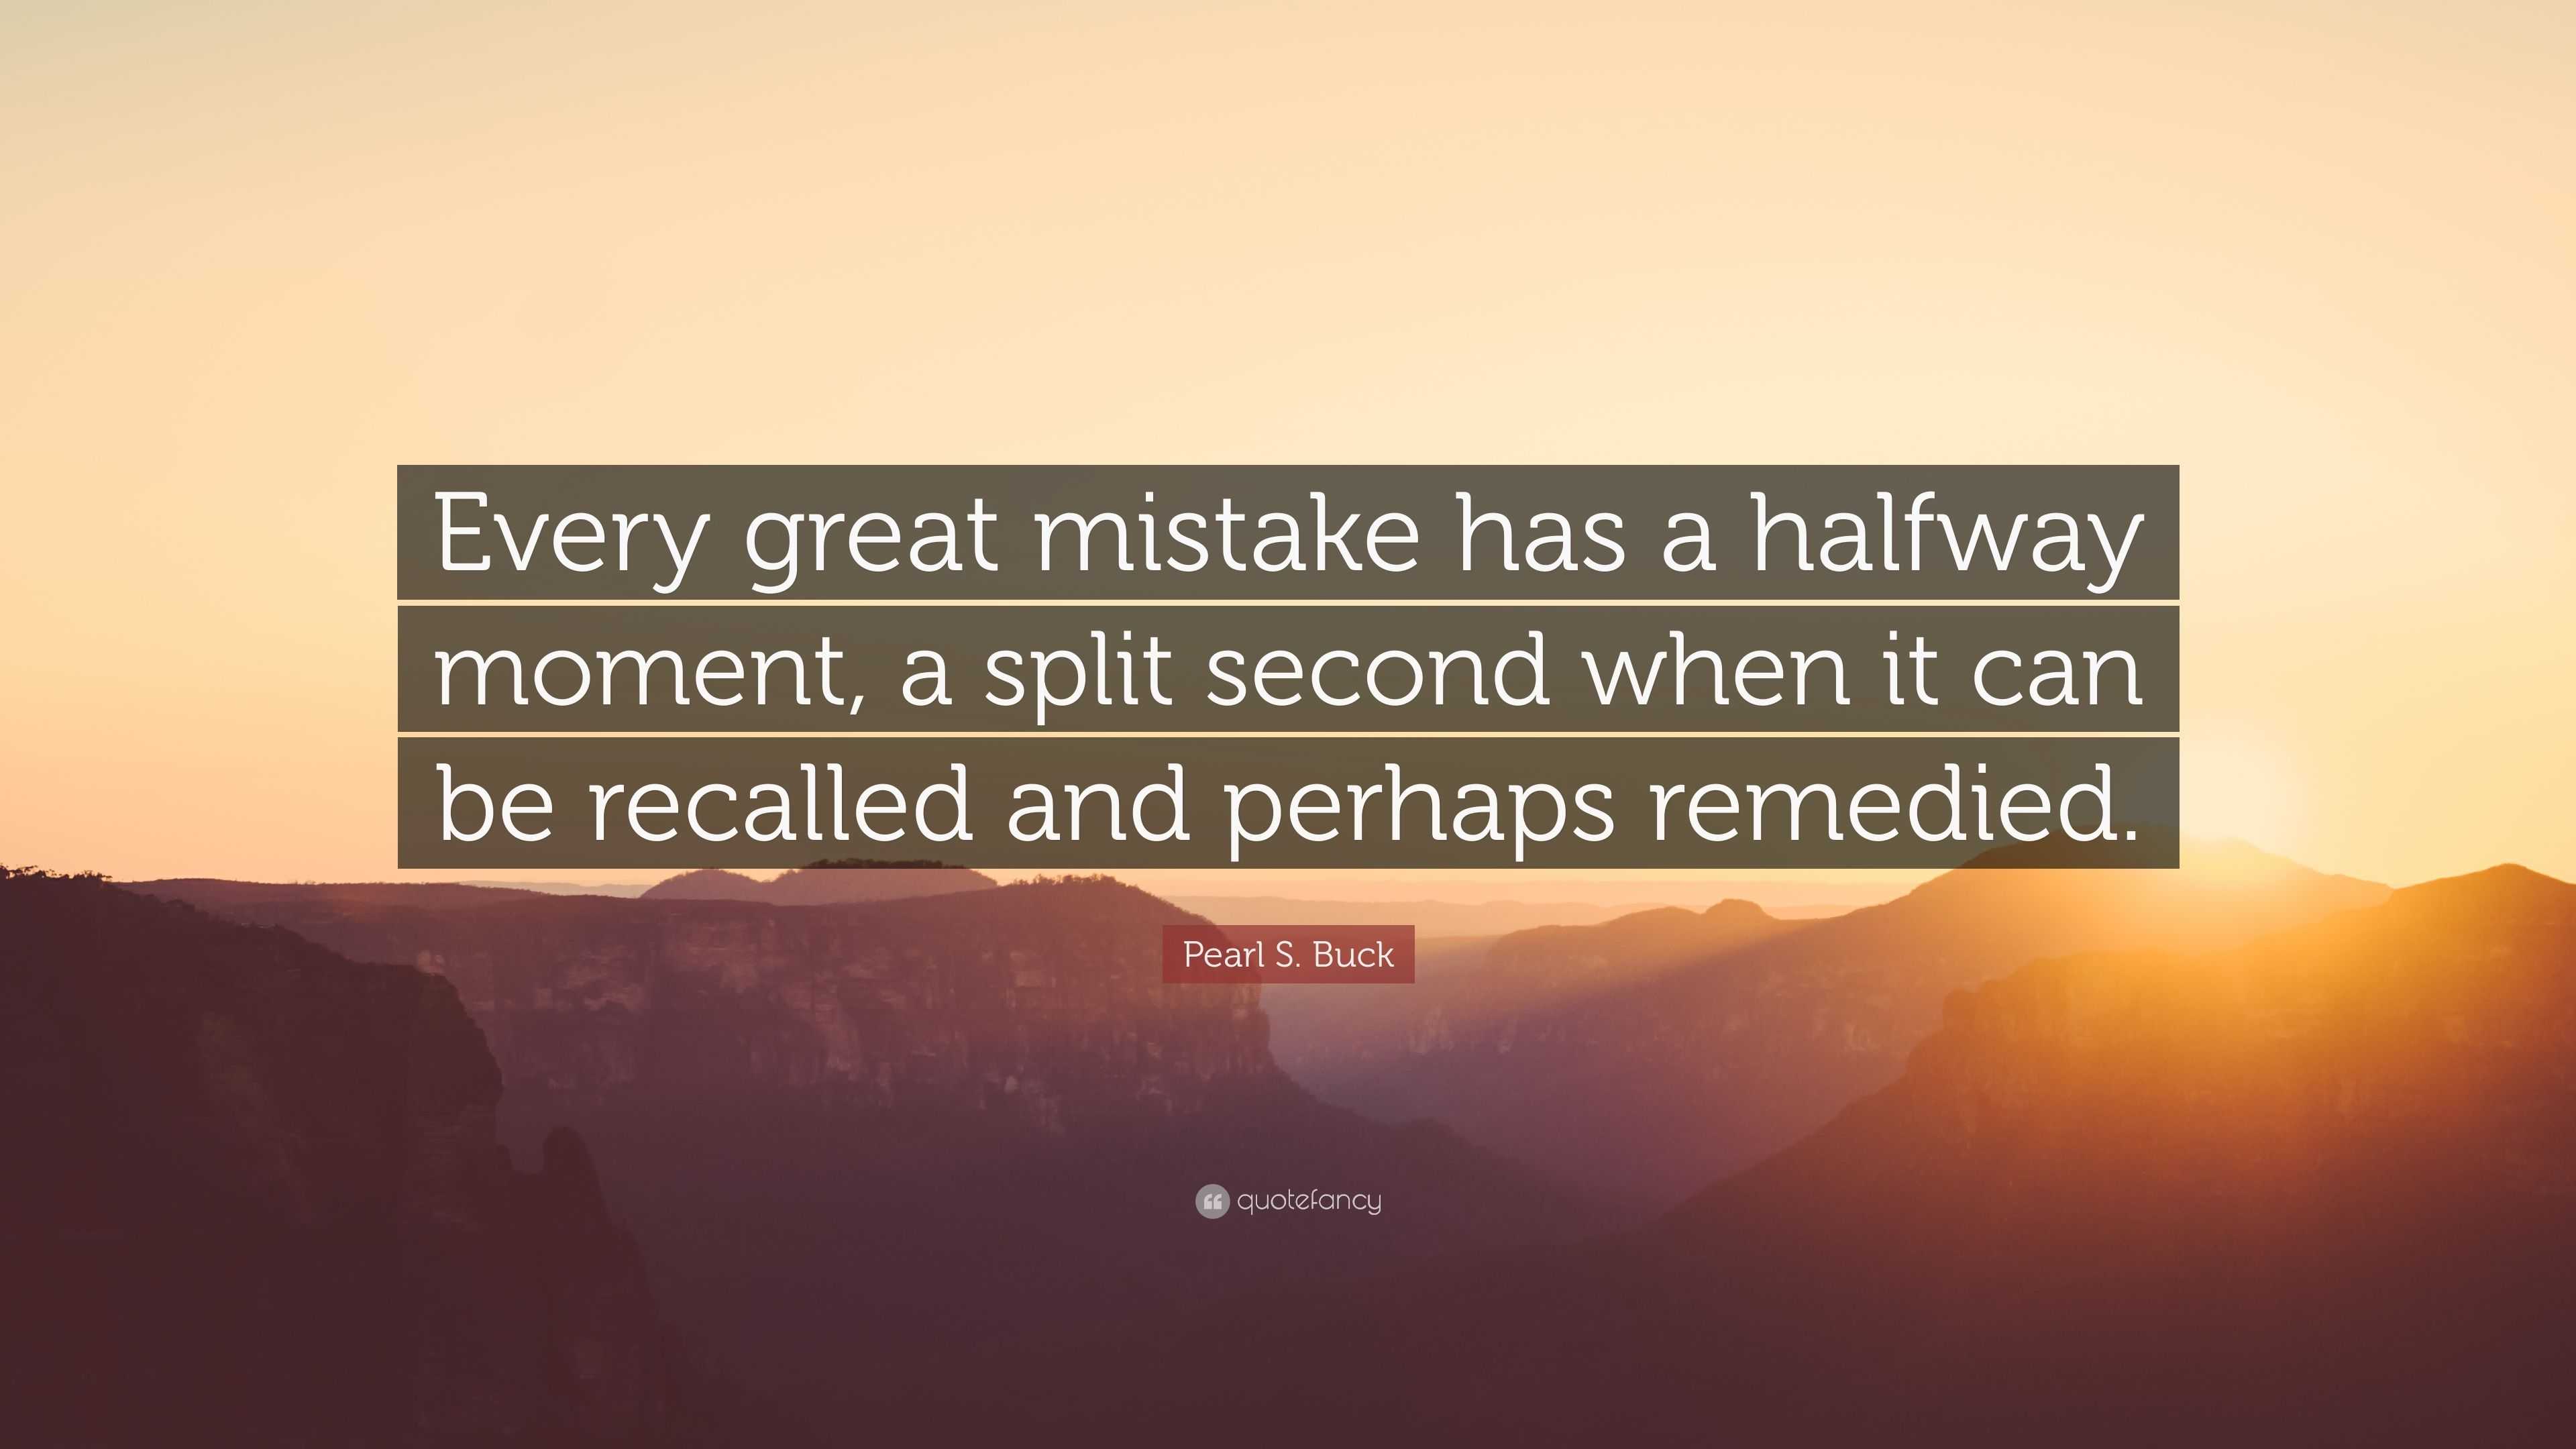 Pearl S. Buck Quote: “Every great mistake has a halfway moment, a split ...